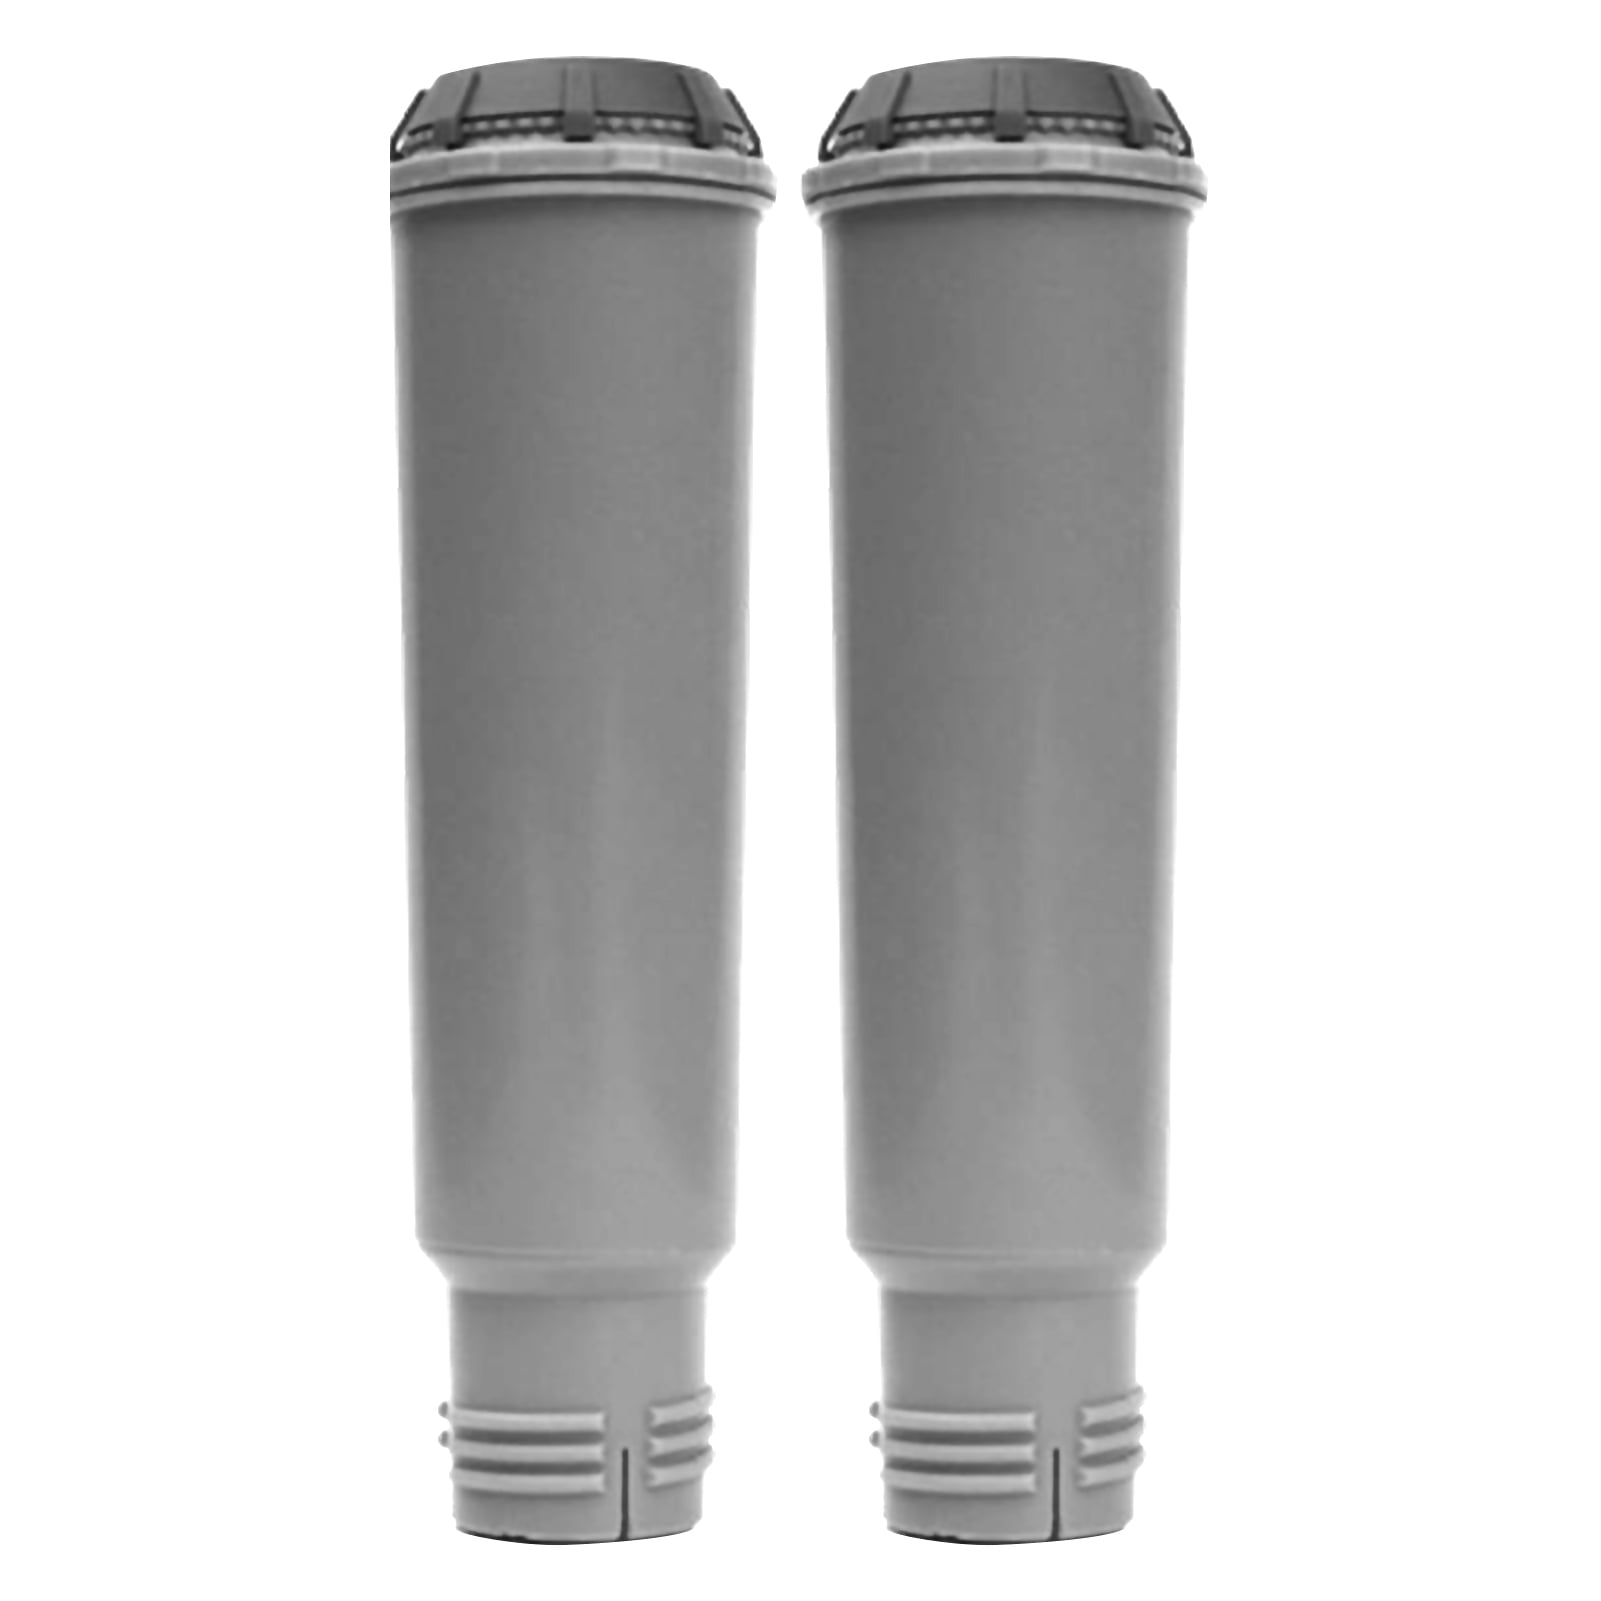 3 Pack Replacement Krups F088 Claris 461732 Coffee Water Filter 